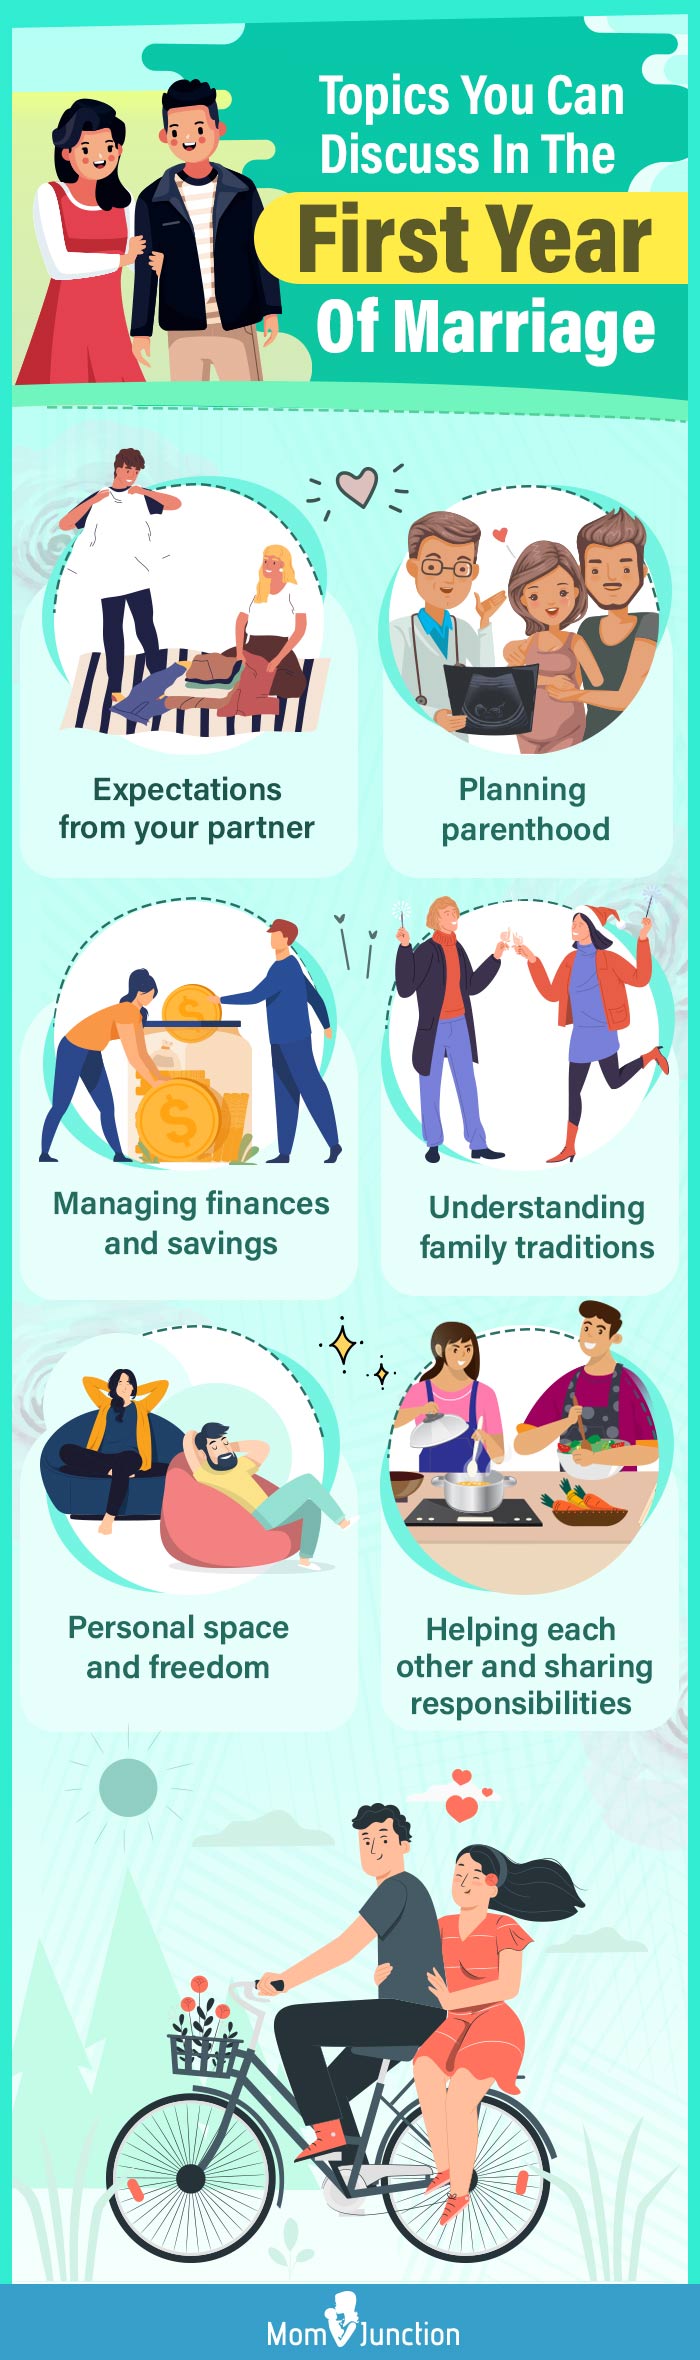 topics you can discuss in the first year of marriage (infographic)